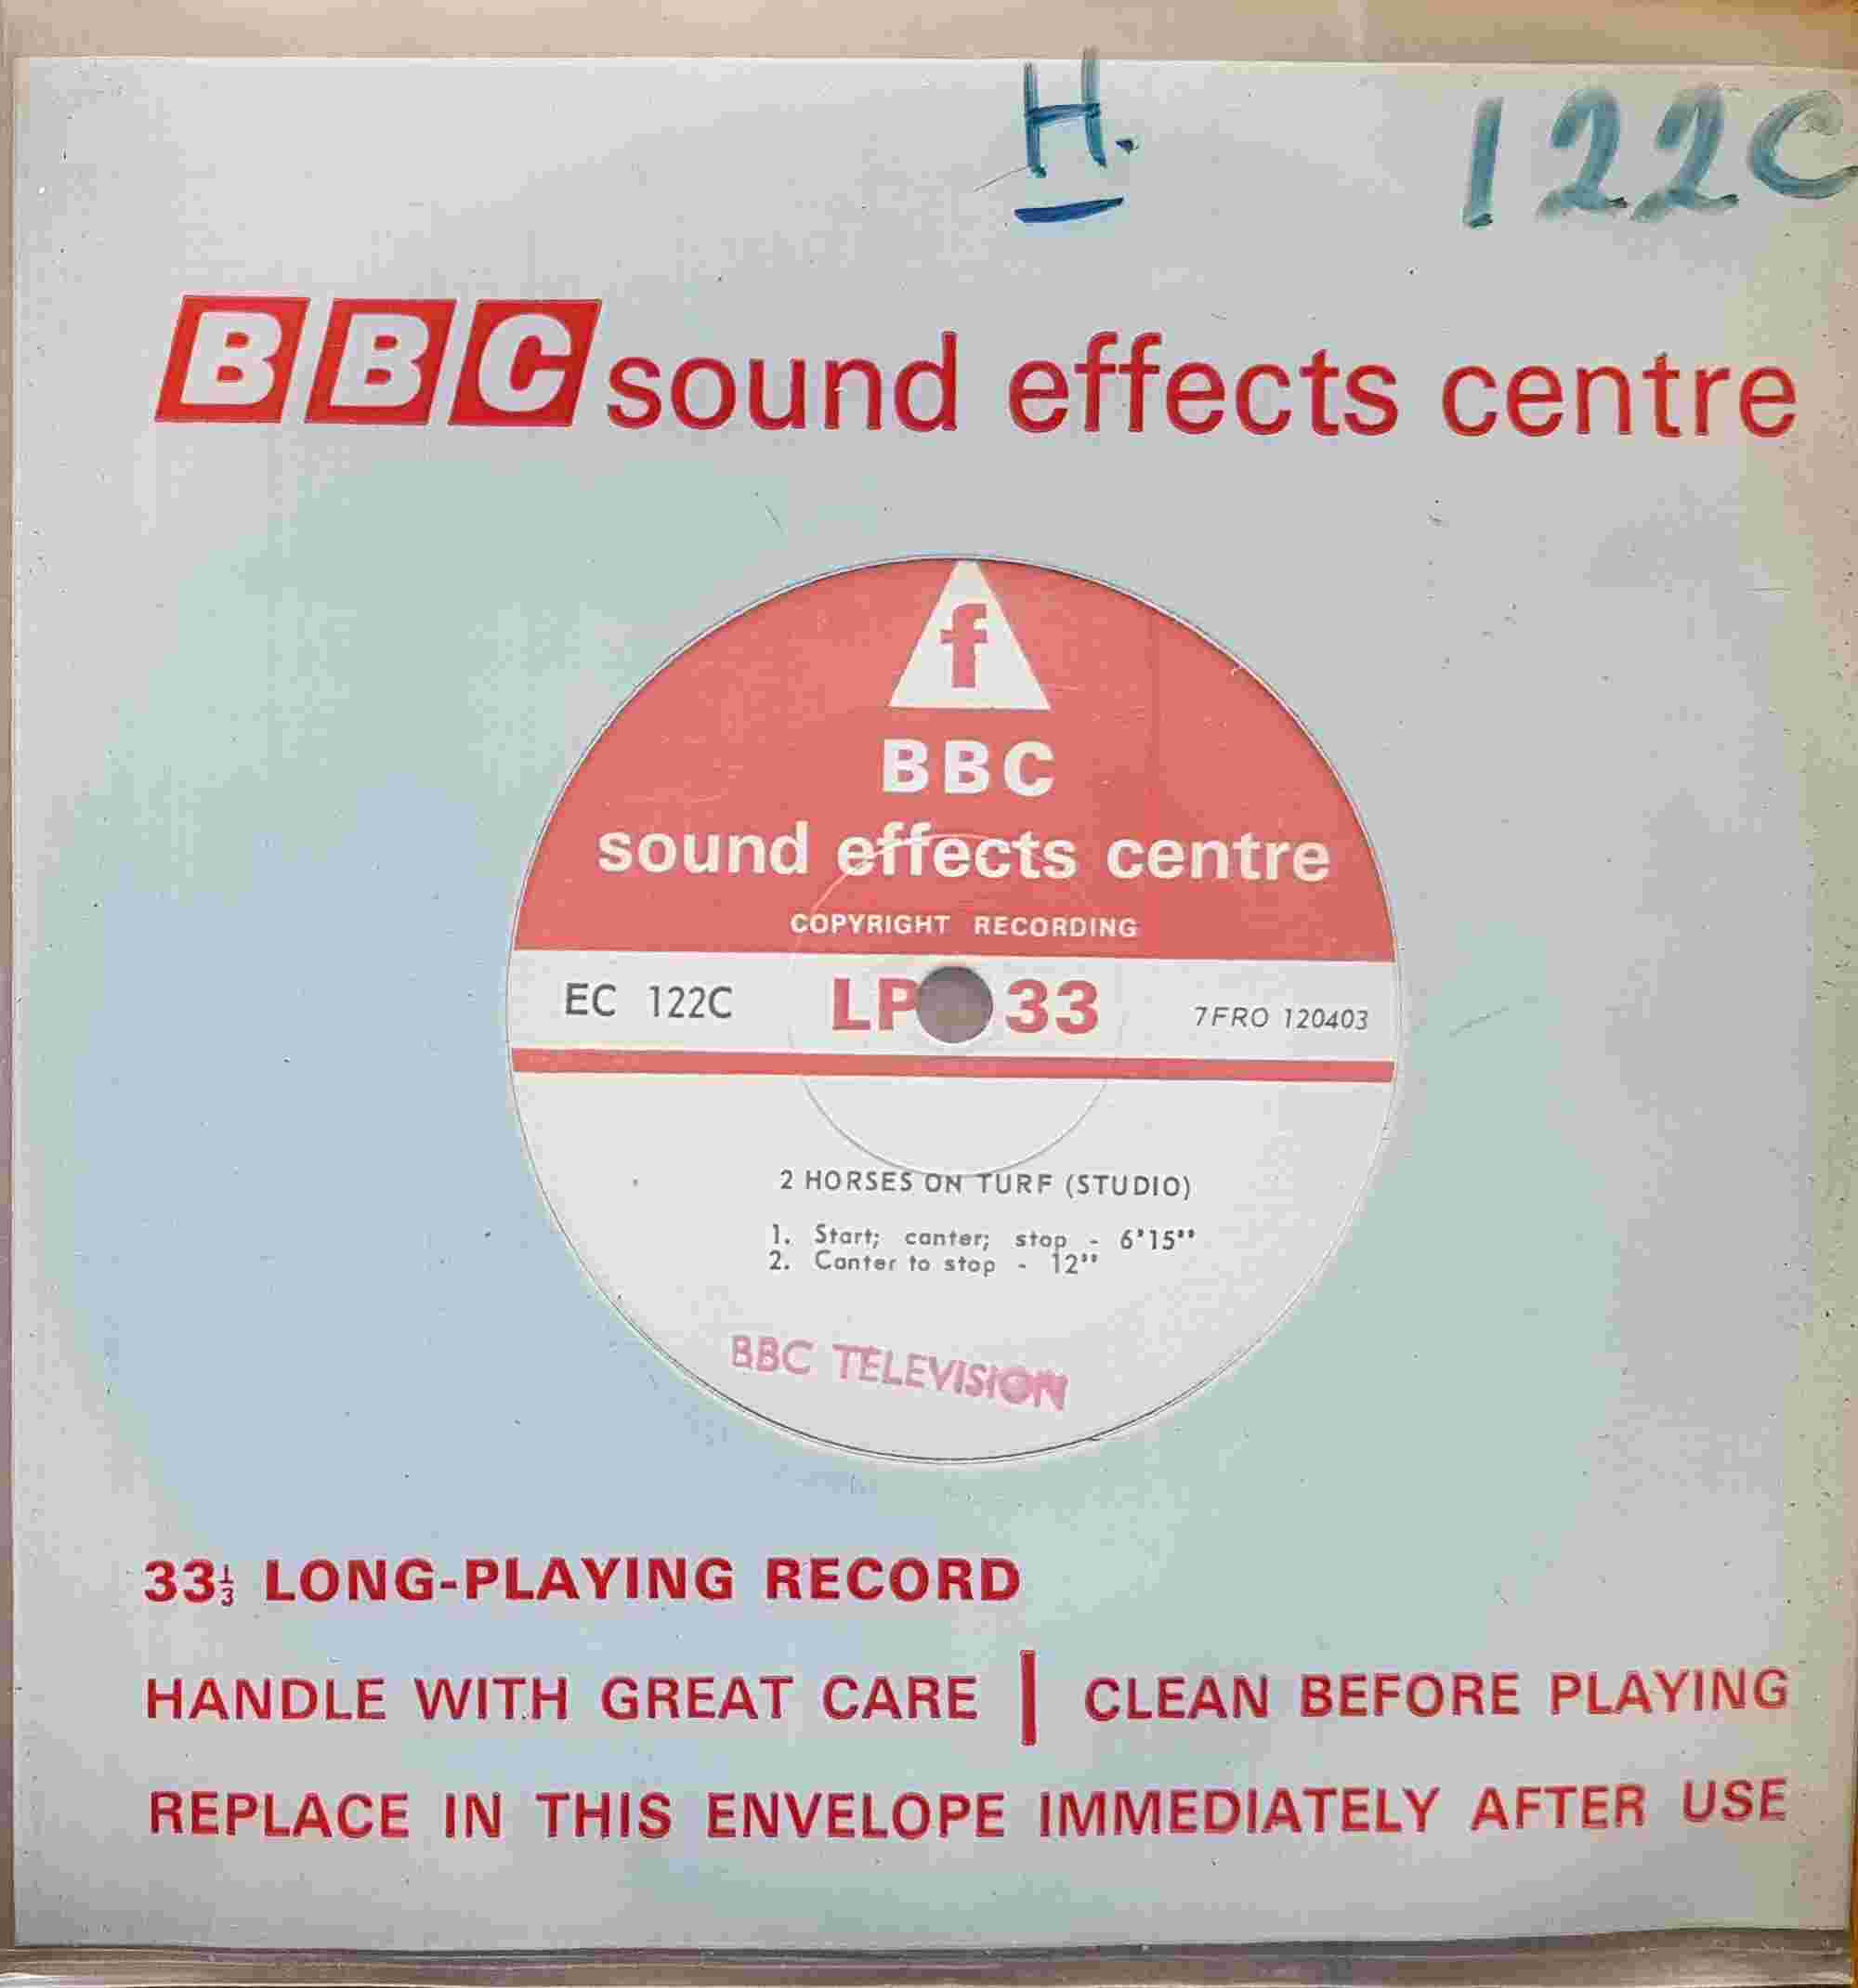 Picture of EC 122C 2 Horses on turf (Studio) by artist Not registered from the BBC singles - Records and Tapes library